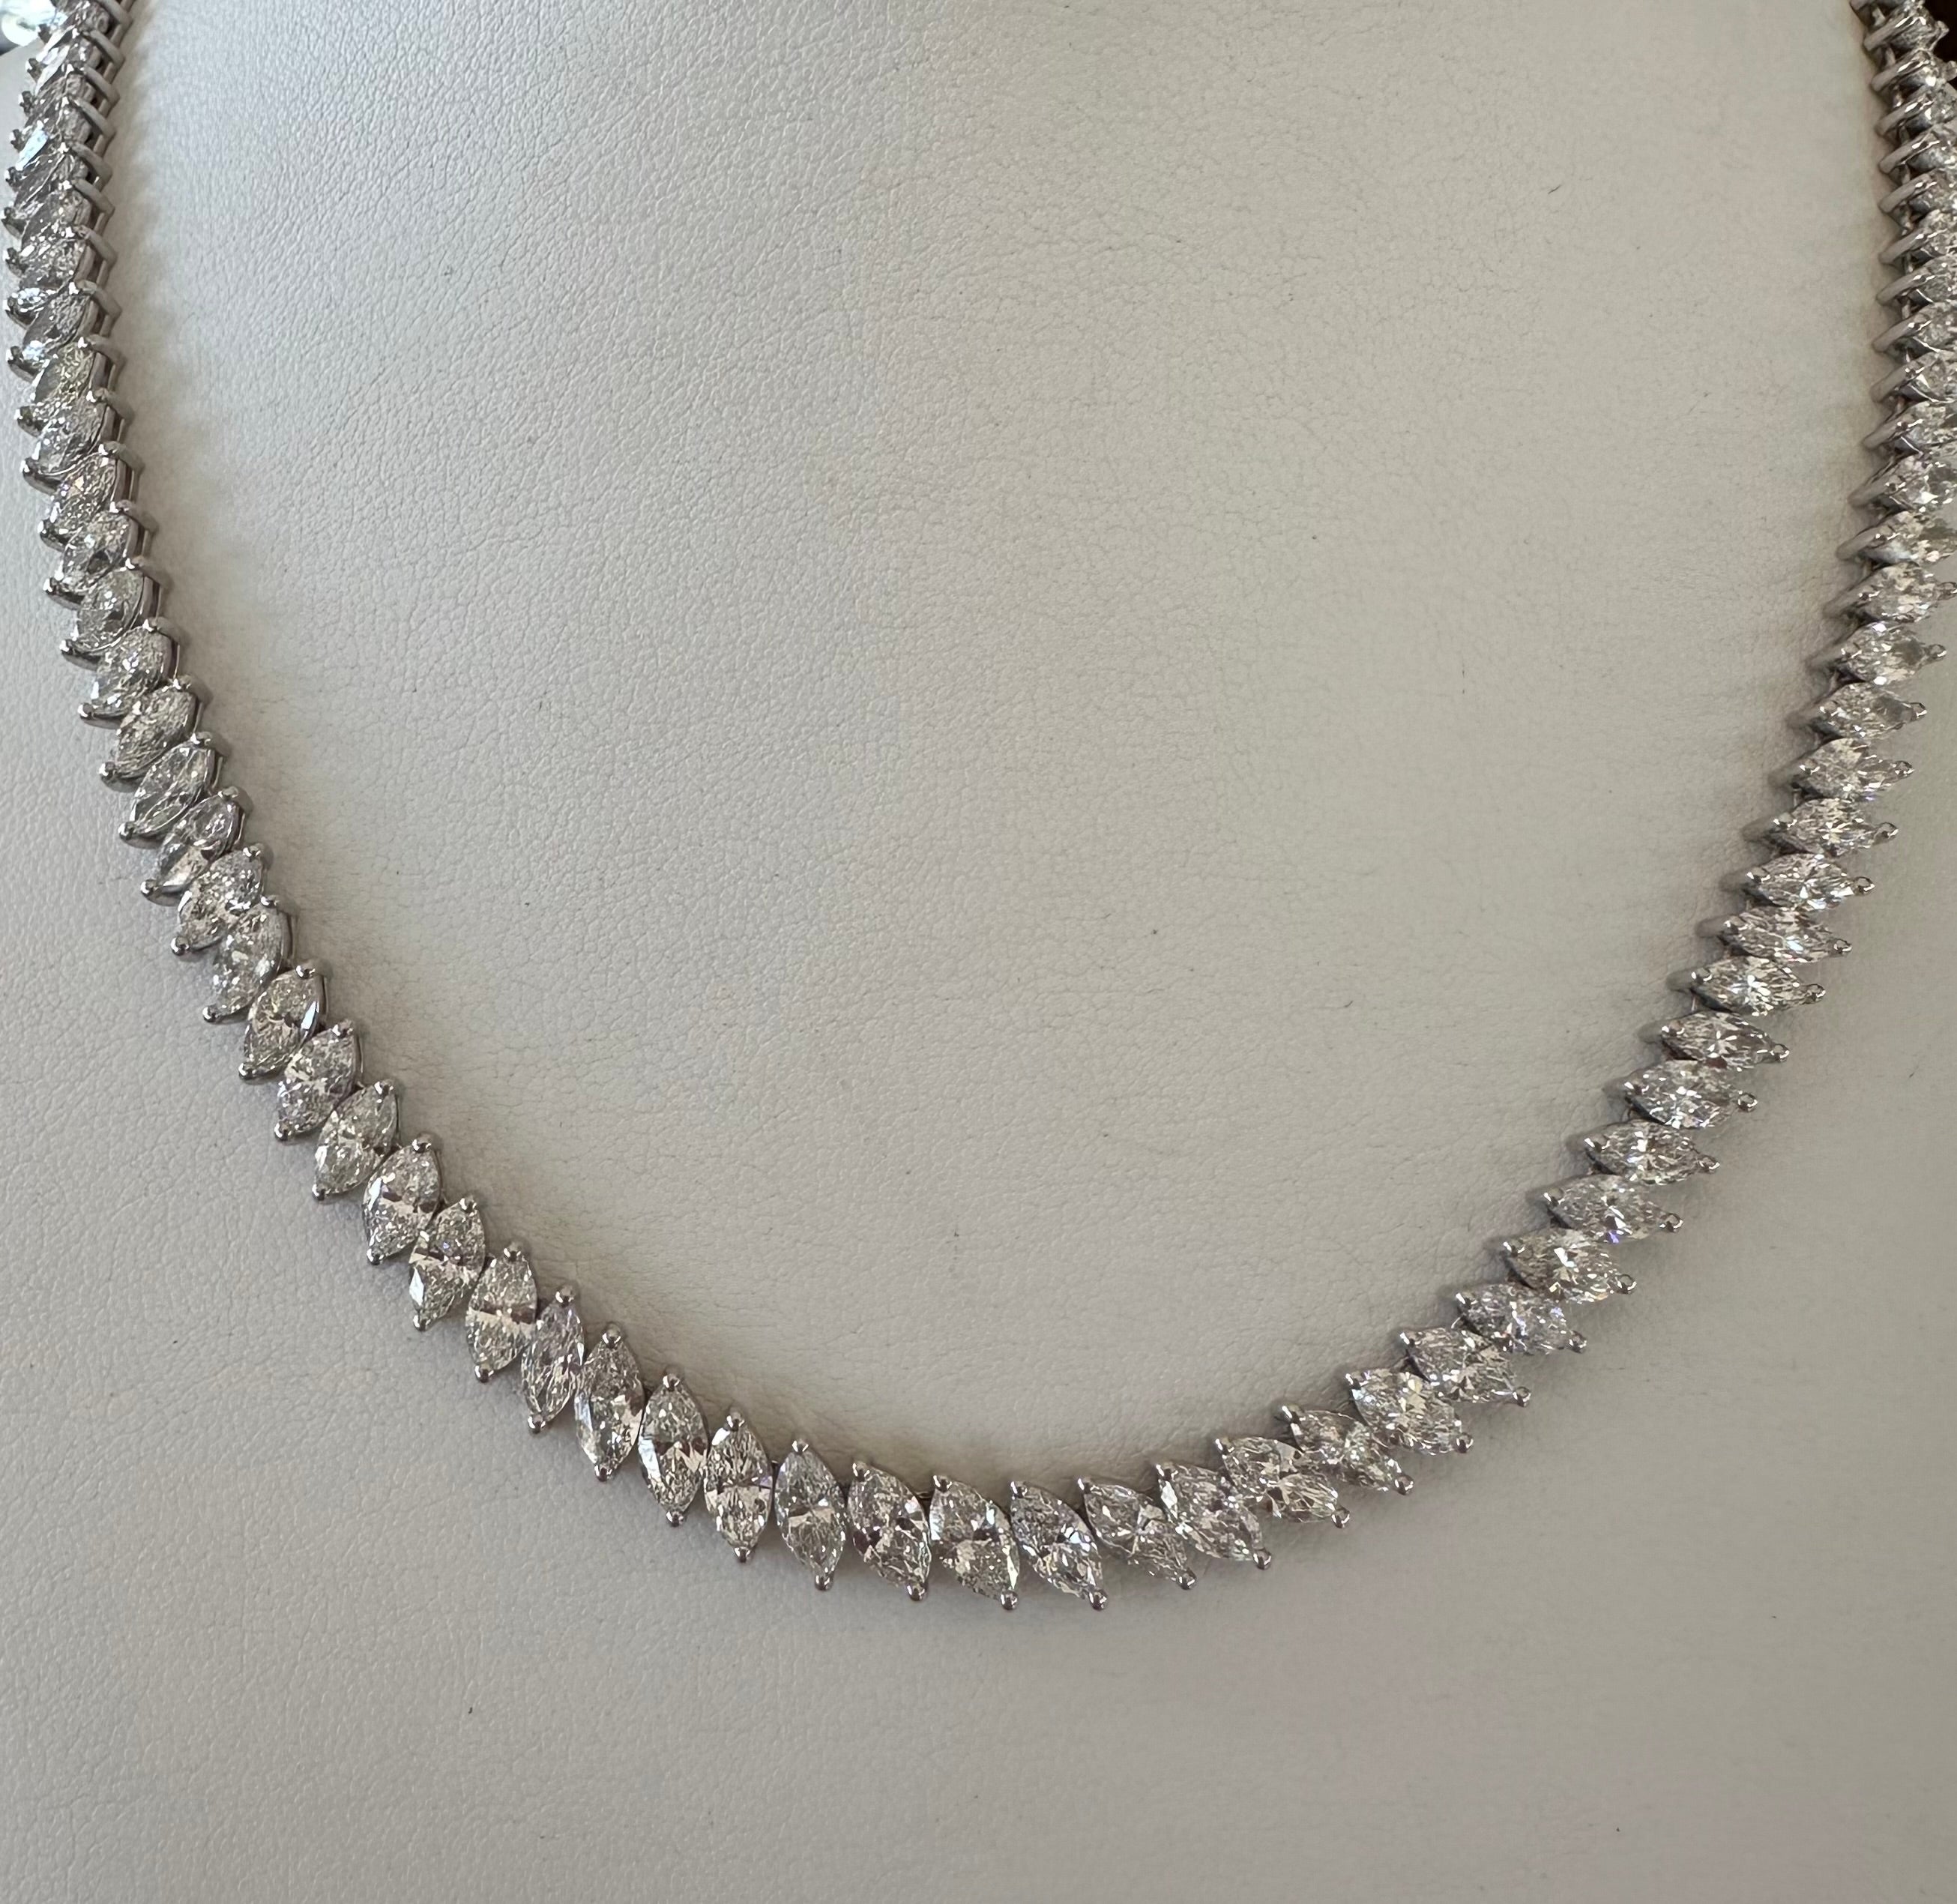 This timeless and elegant graduated diamond necklace showcases a magnificent array of 127 dazzling marquise-shaped diamonds, GH color, SI12 clarity, together weighing 31.05 carats. The necklace measures 17 inches long. Handcrafted in 18K white gold.